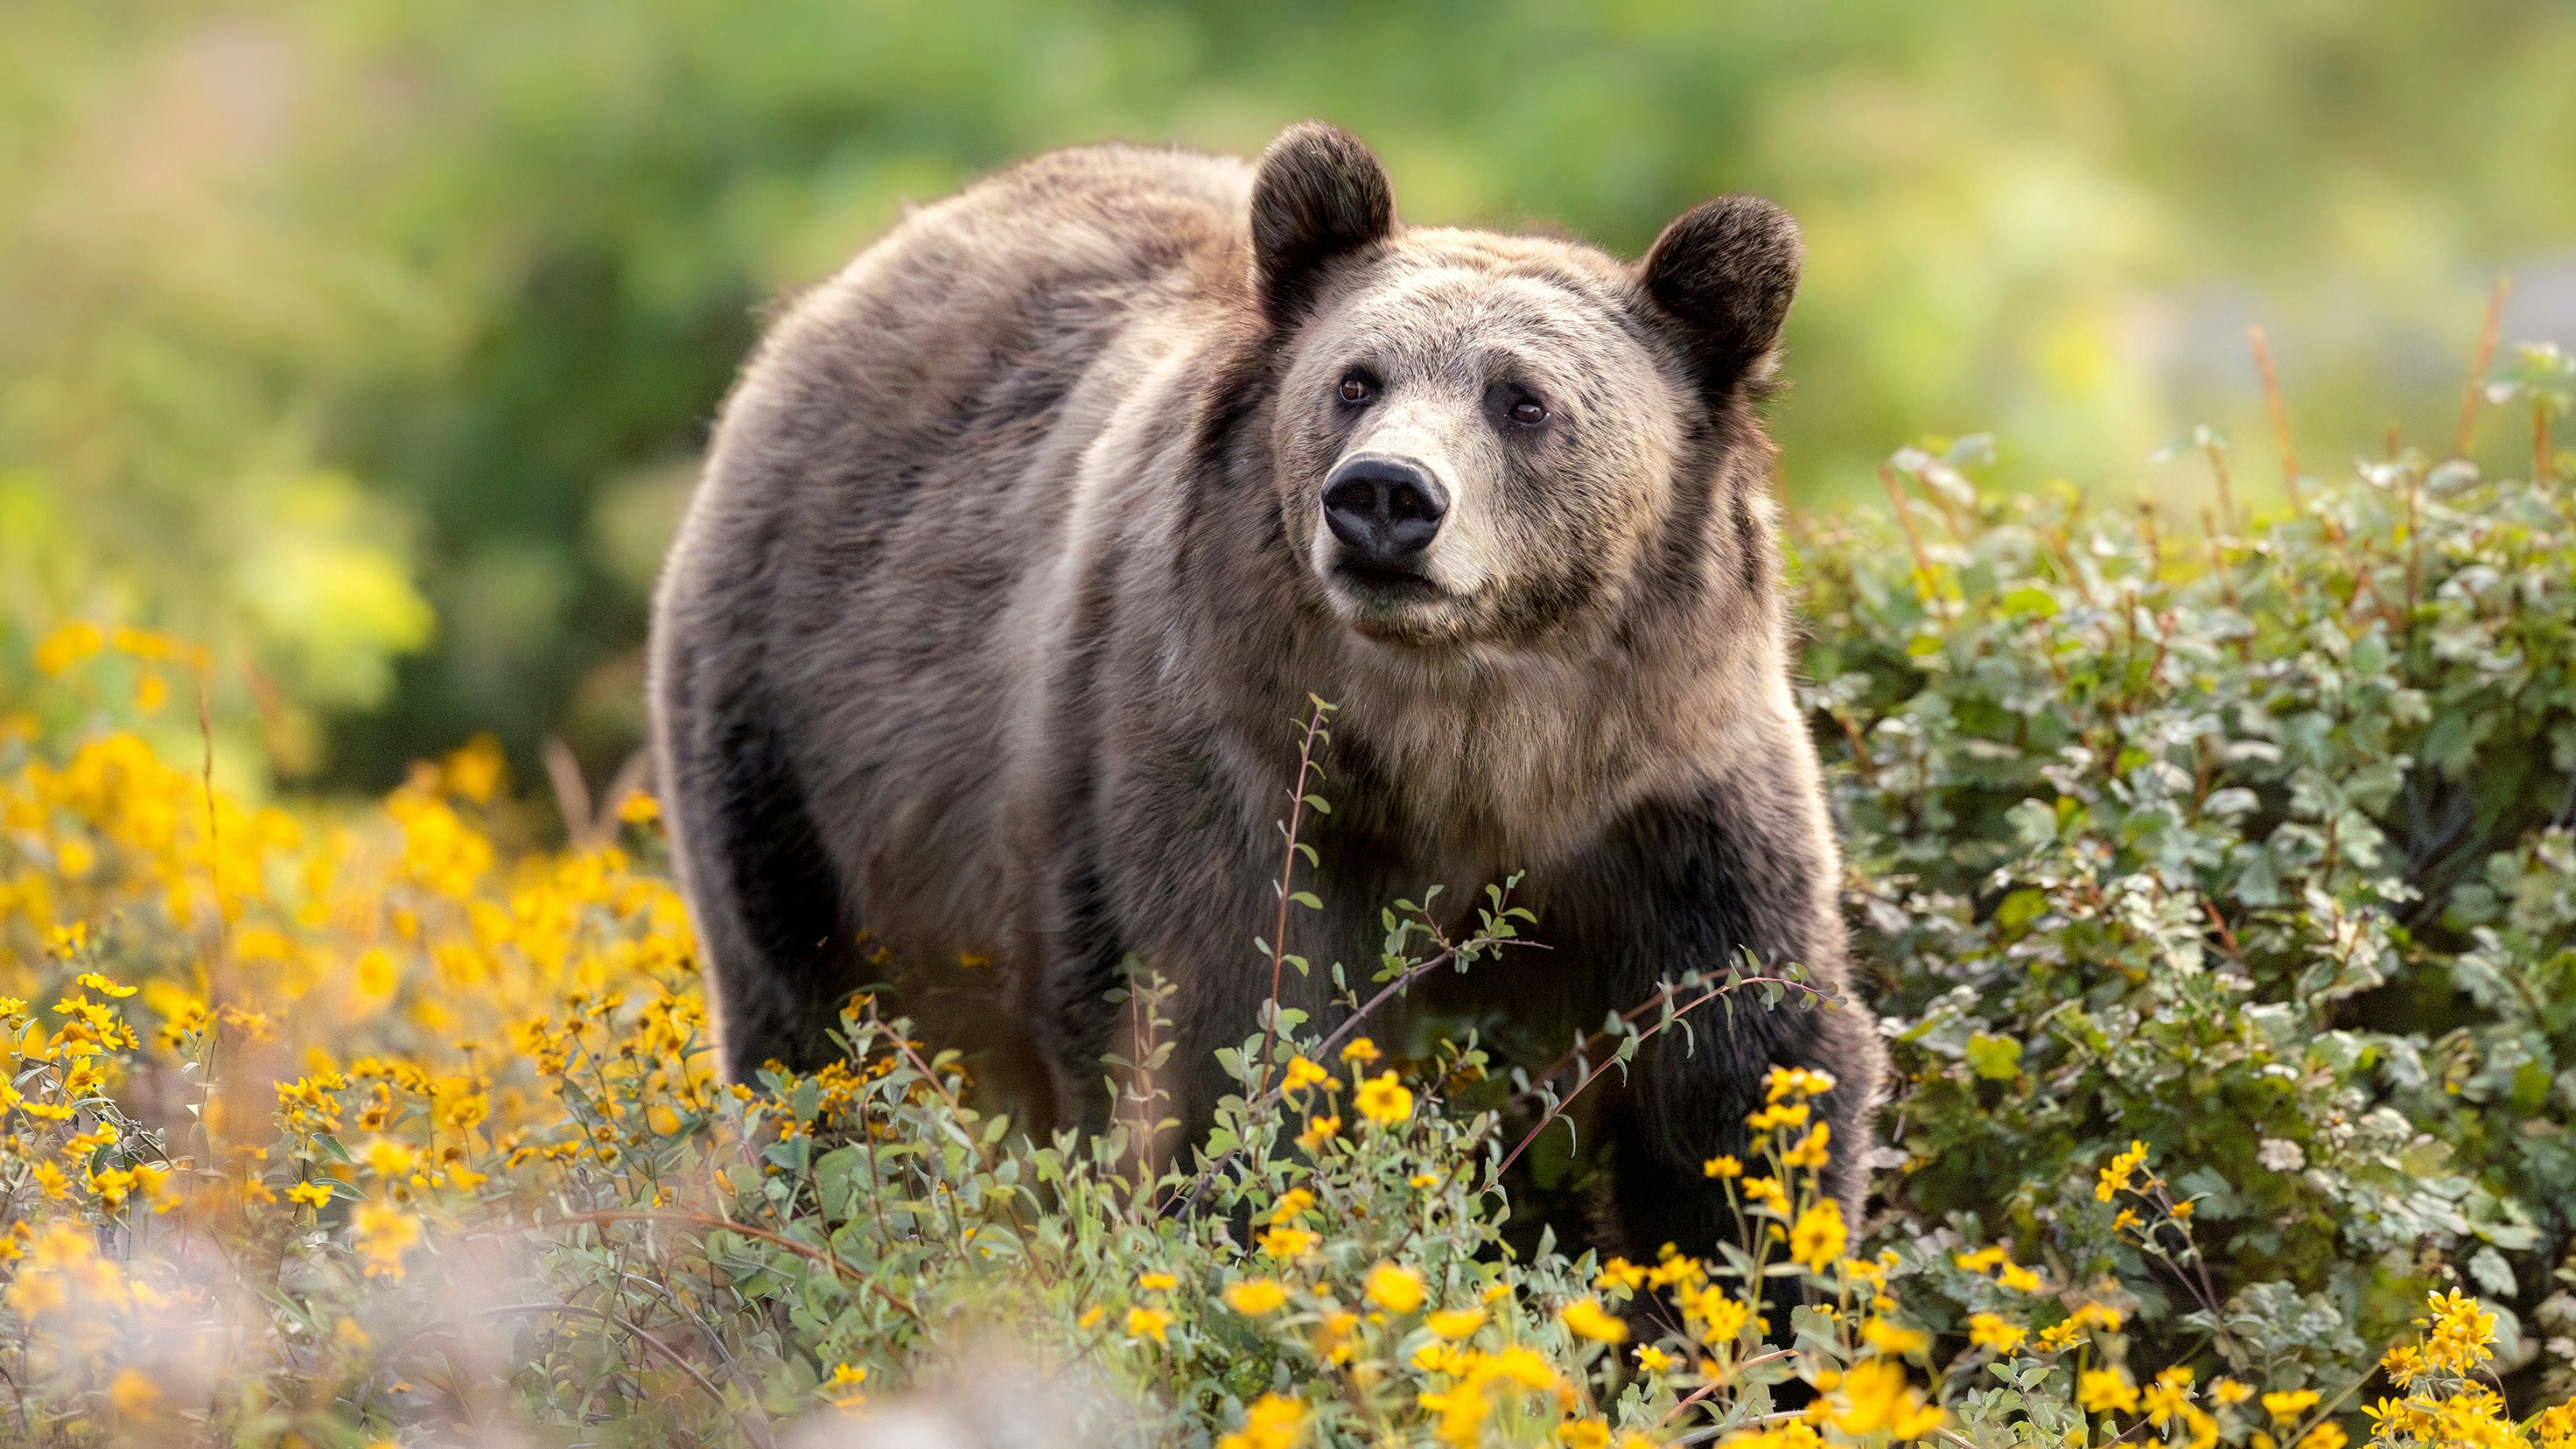 This image is one of Julia Cook's favorites, partially because it shows her favorite grizzly known as the 9-mile sow, or Snow. She and her cubs had been feeding on berries for quite some time down in a small meadow. Cook noticed a vibrant patch of yellow wildflowers blooming nearby and began hoping she would walk through the flowers. Just when it was almost dark, she walked into the flowers, pausing briefly to glance around.